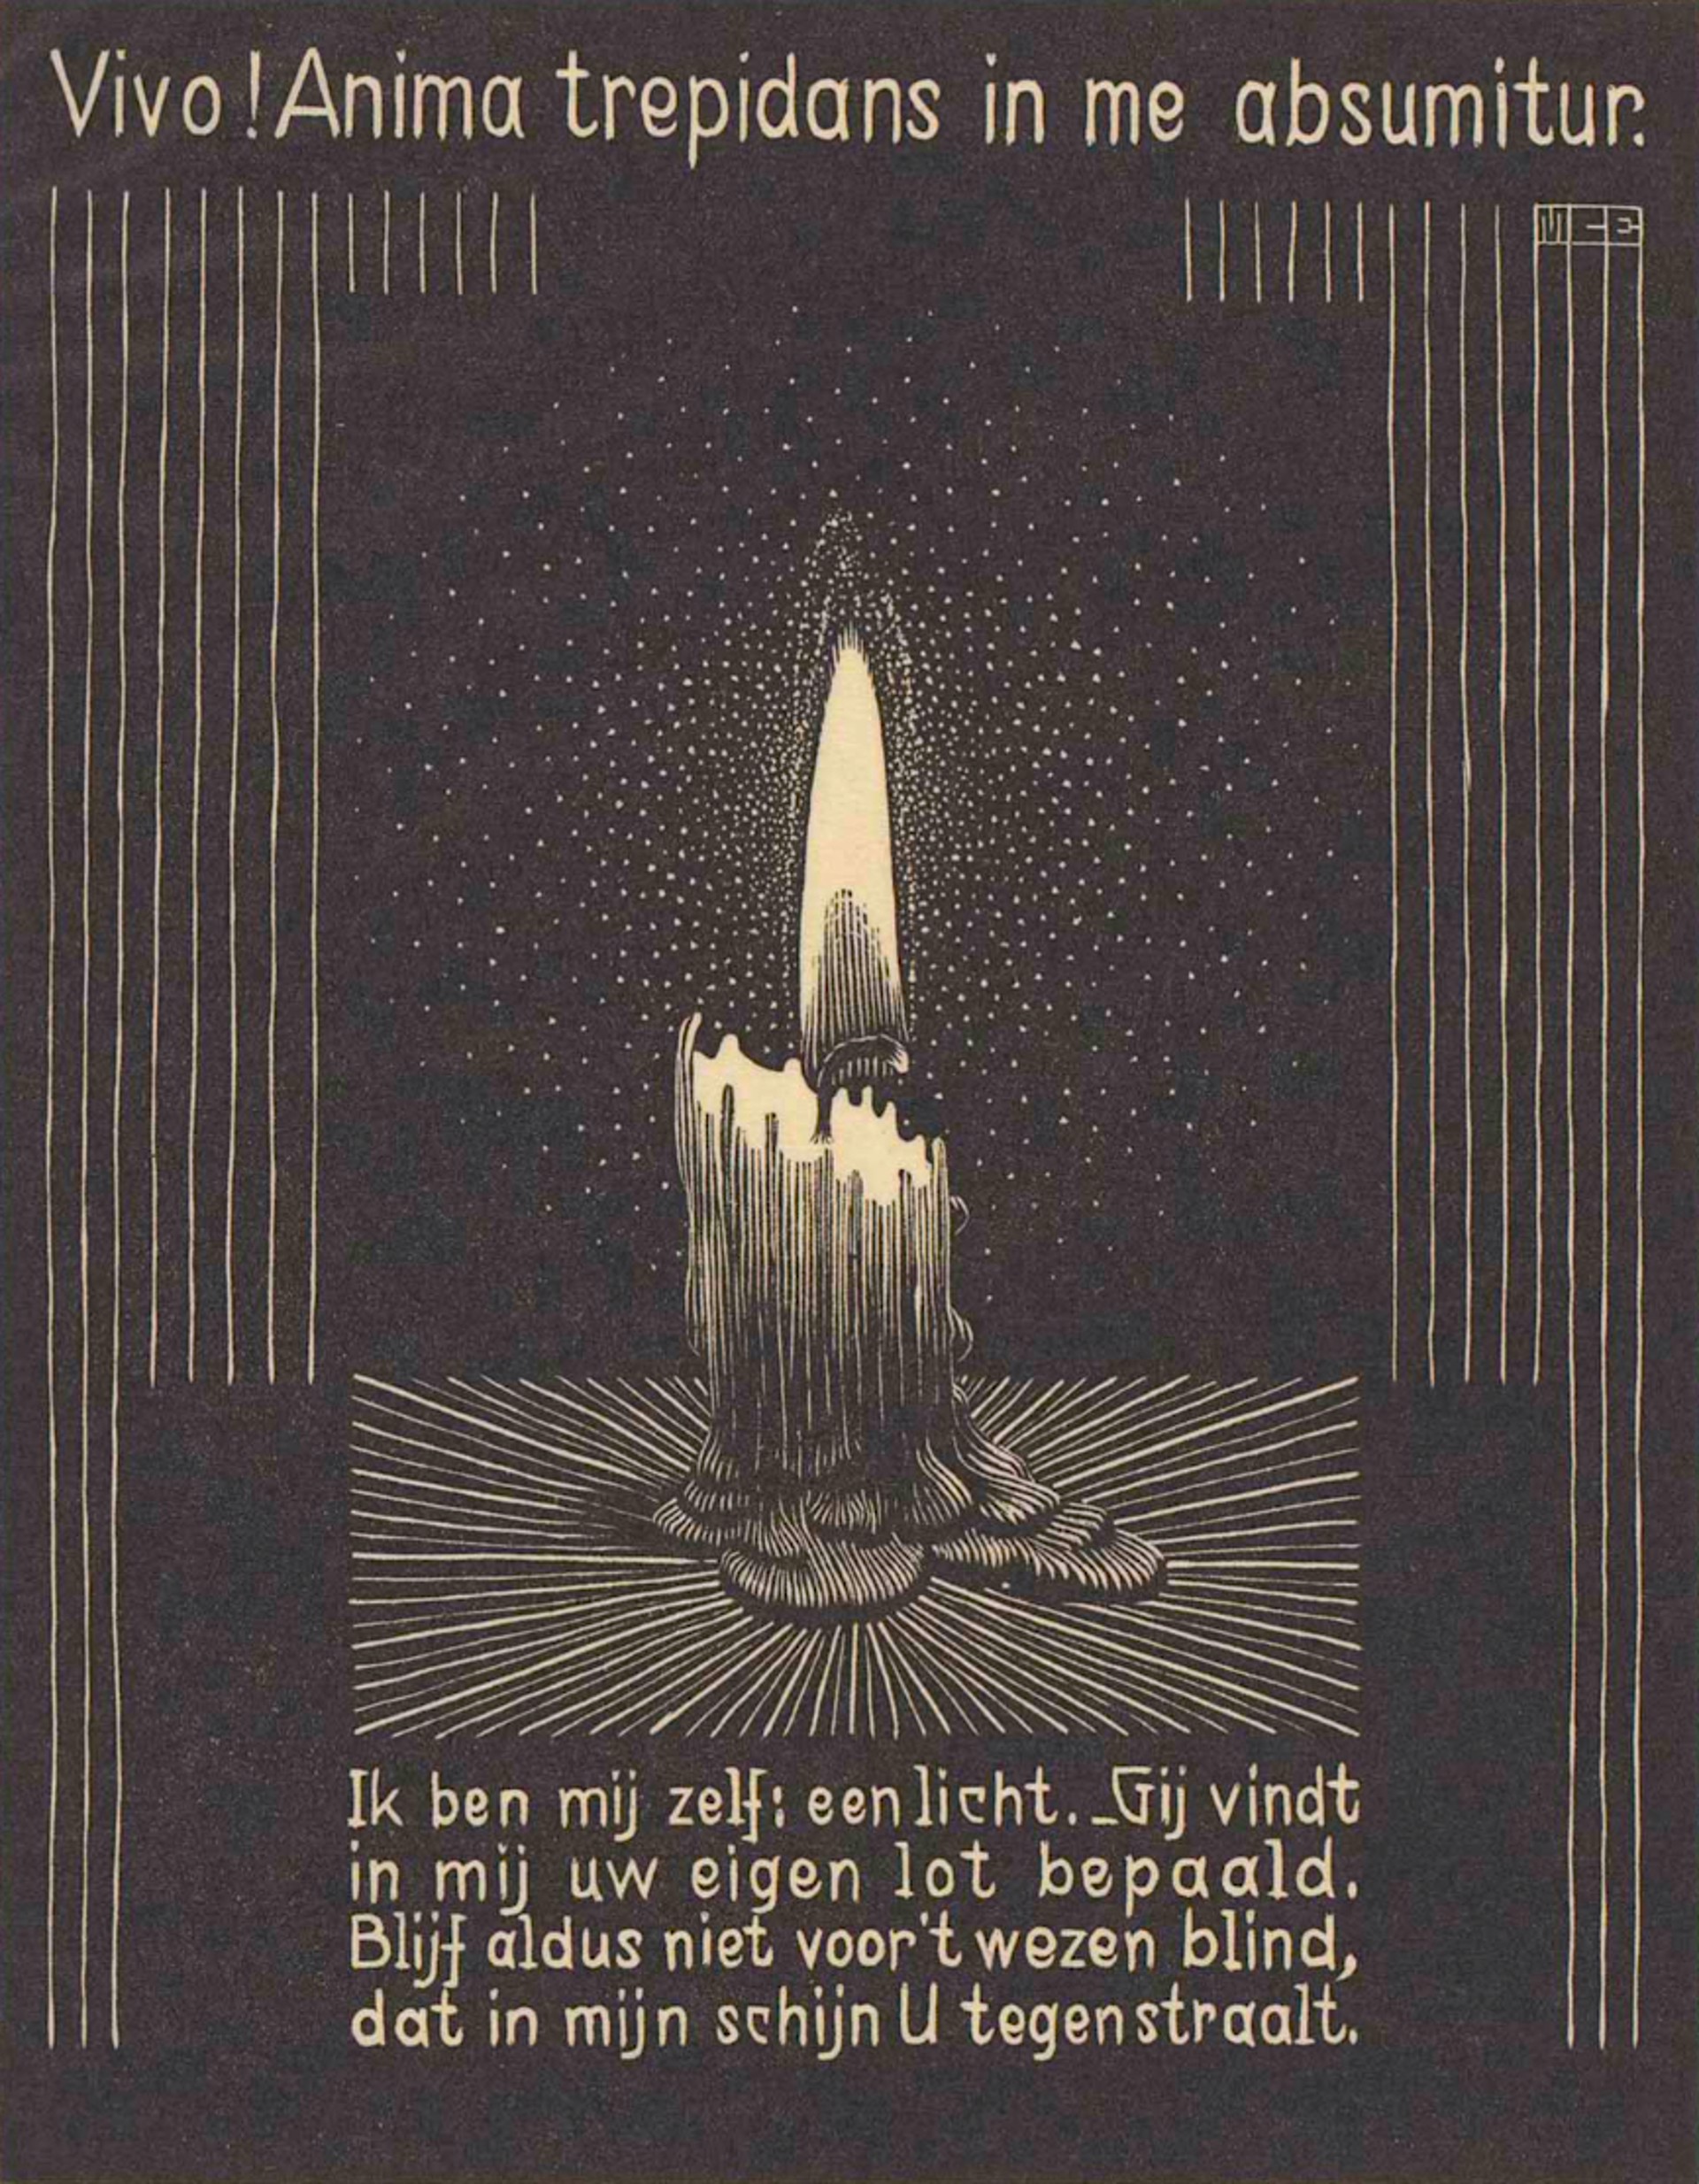 Emblemata - Candle Flame by M.C. Escher